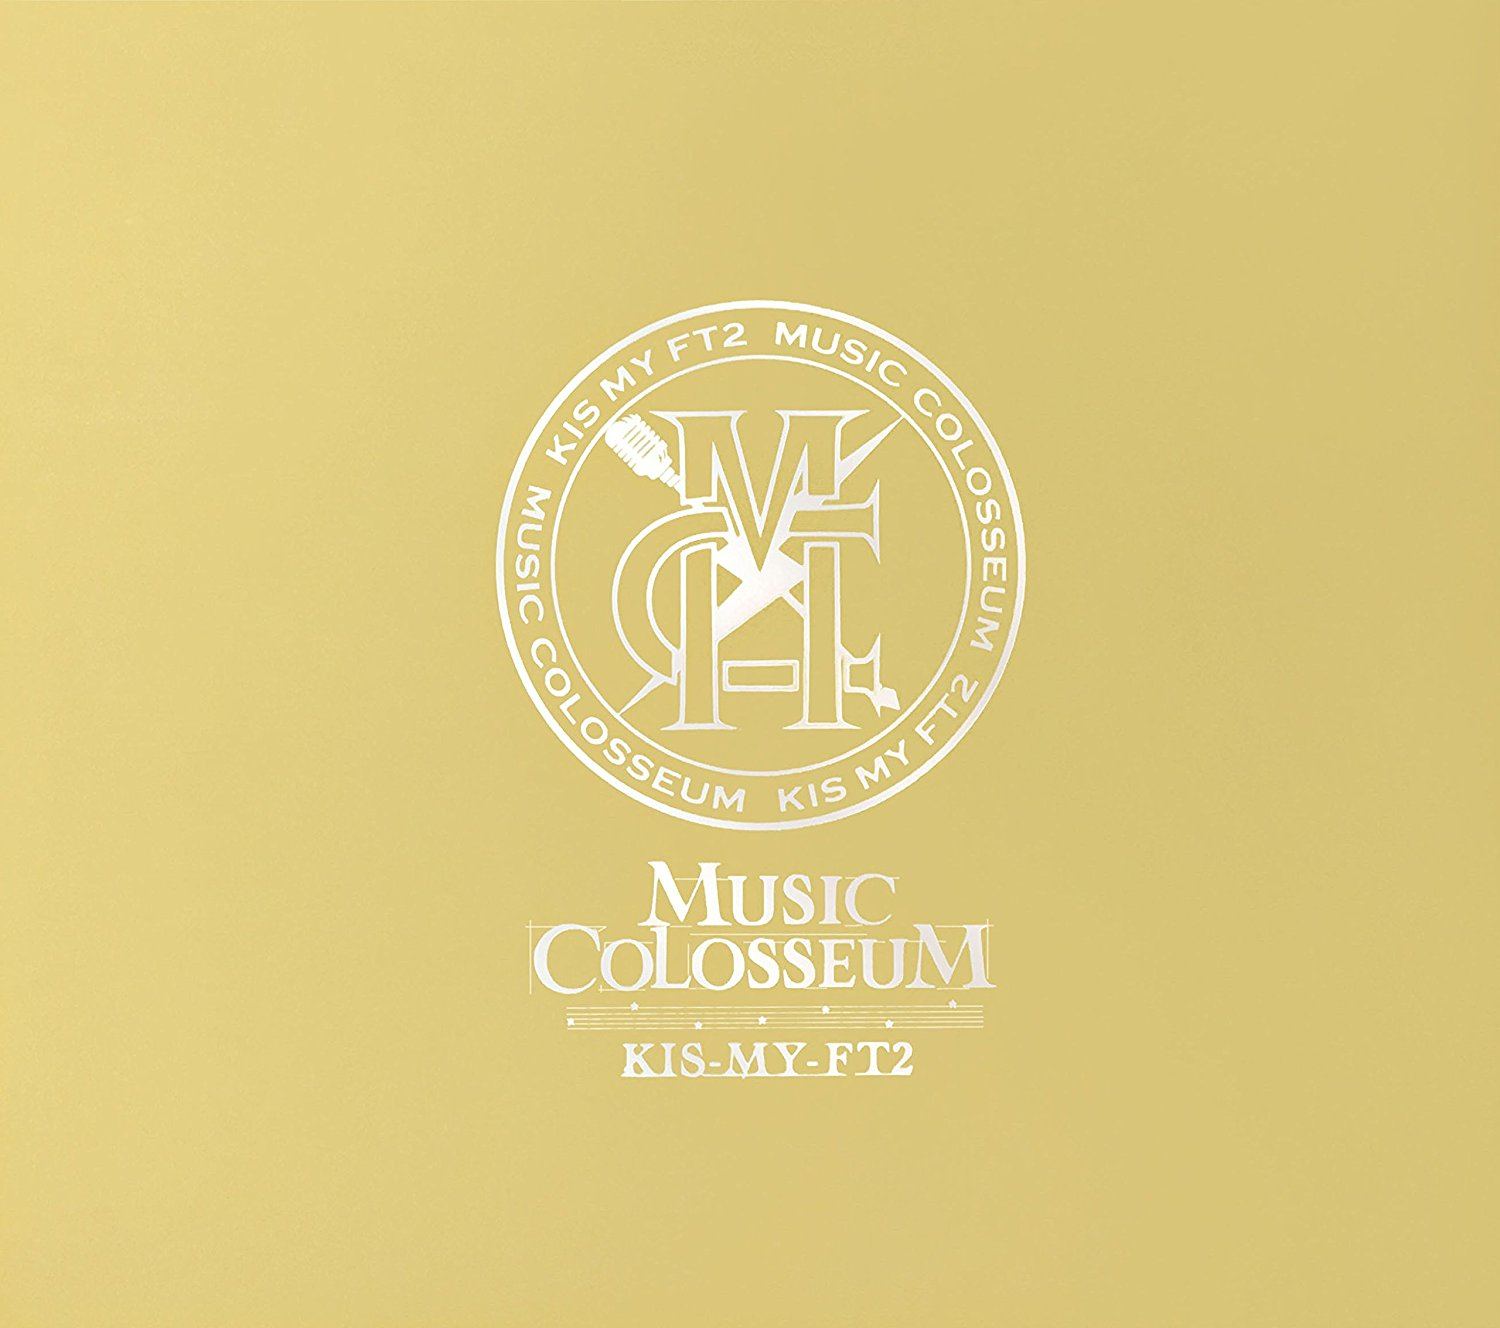 Music Colosseum [CD+DVD Limited Edition Type A] (Kis-my-ft2)